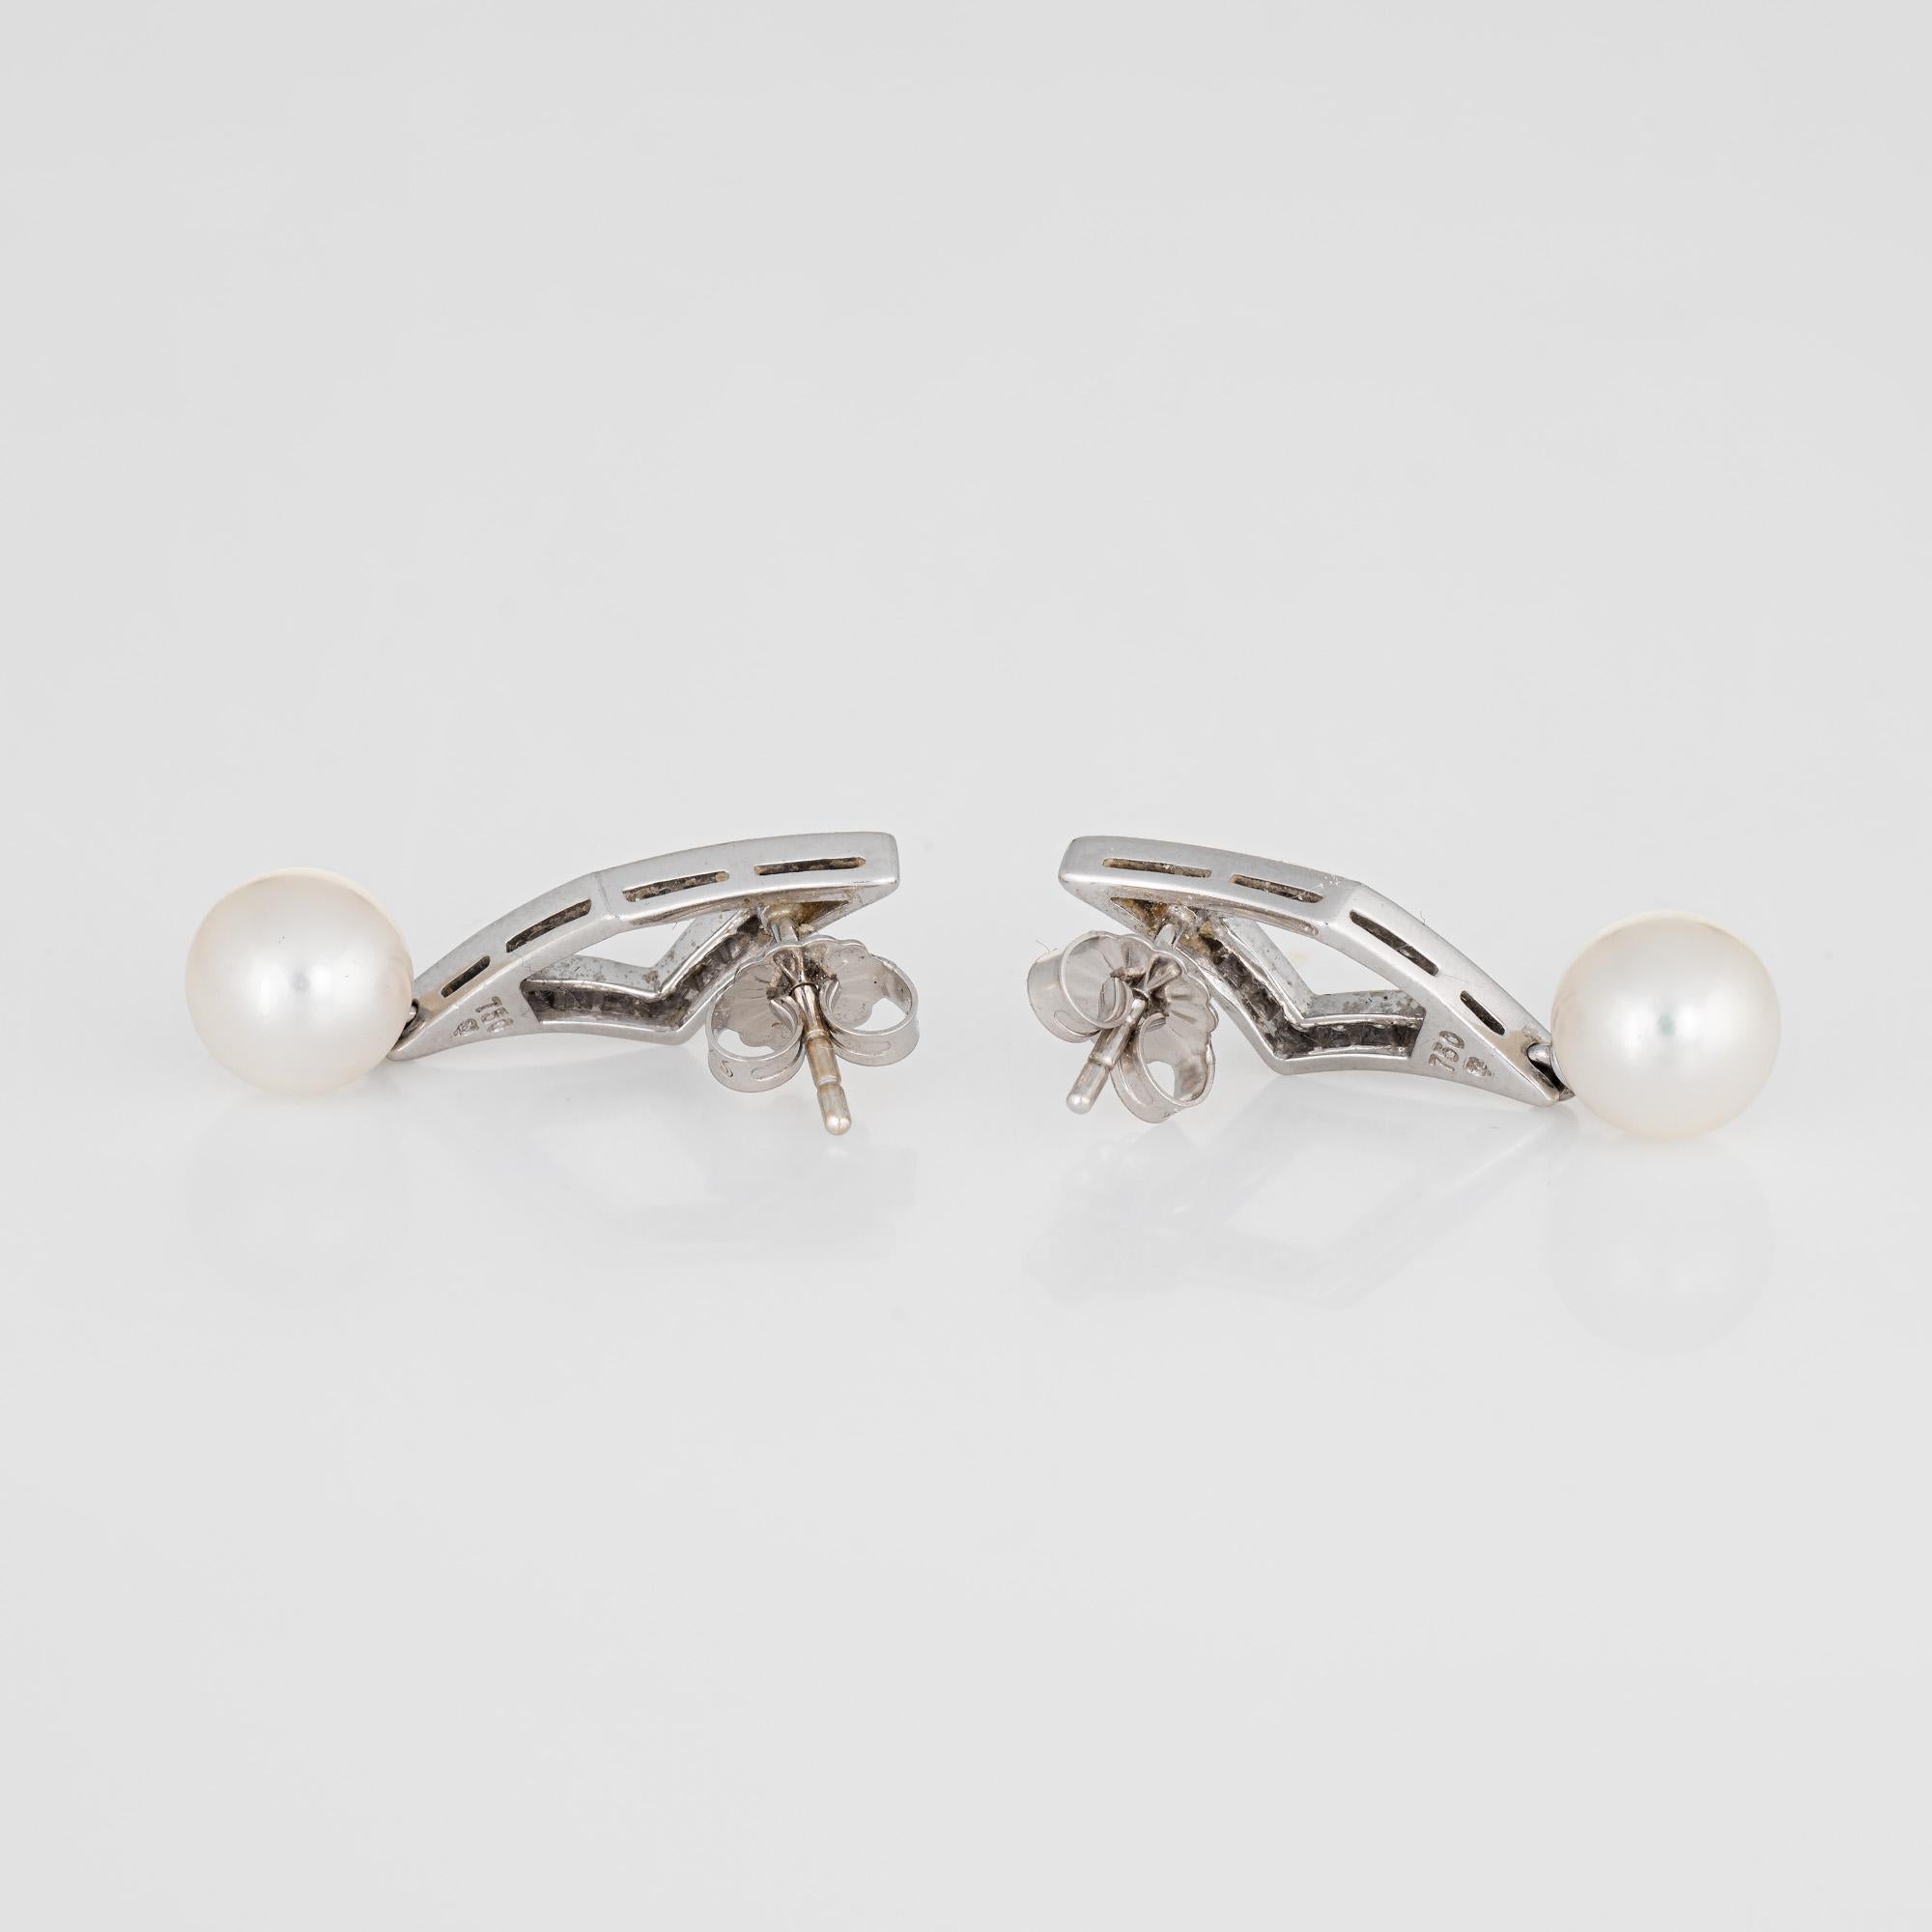 Elegant pair of Mikimoto cultured Akoya pearl & diamond earrings crafted in 18k white gold. 

Two 7.5mm cultured Akoya pearls are accented with an estimated 0.24 carats of diamonds (estimated at G-H color and VS clarity). The pearls are lustrous and